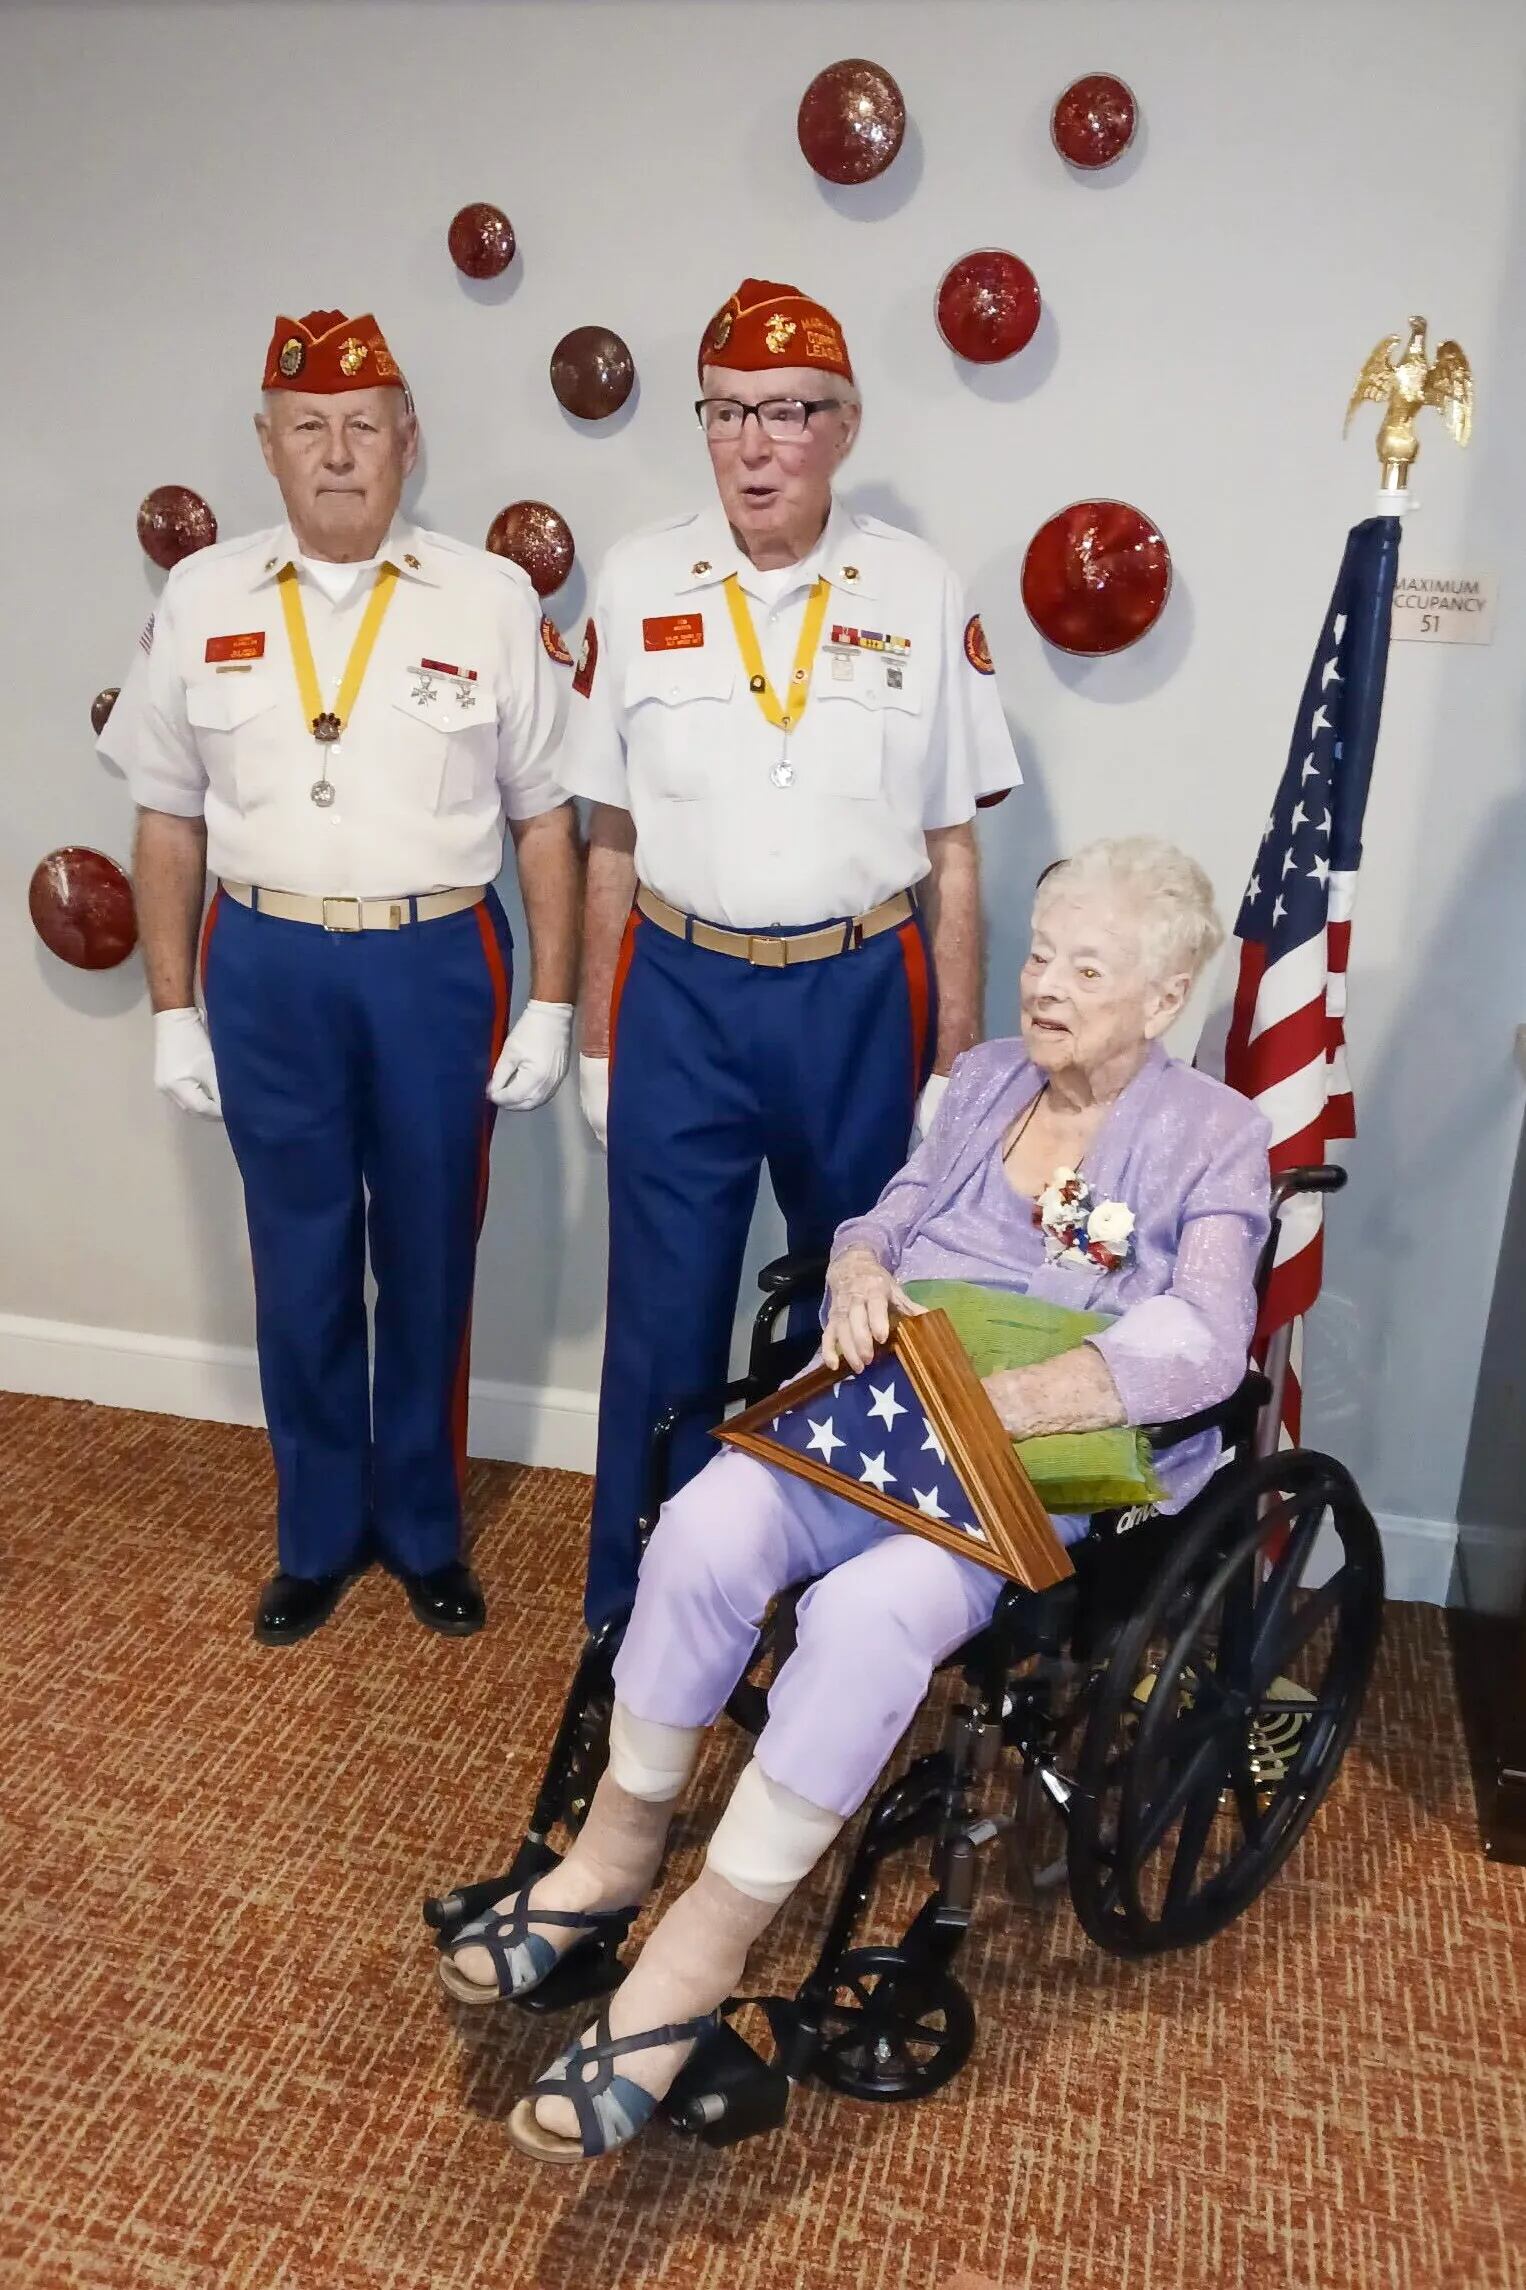 The mother of Cpl. David Ortals, who died in Vietnam, was presented with an American flag at her home in Arizona as ceremonies here honored her son. She turned 100 on Saturday.